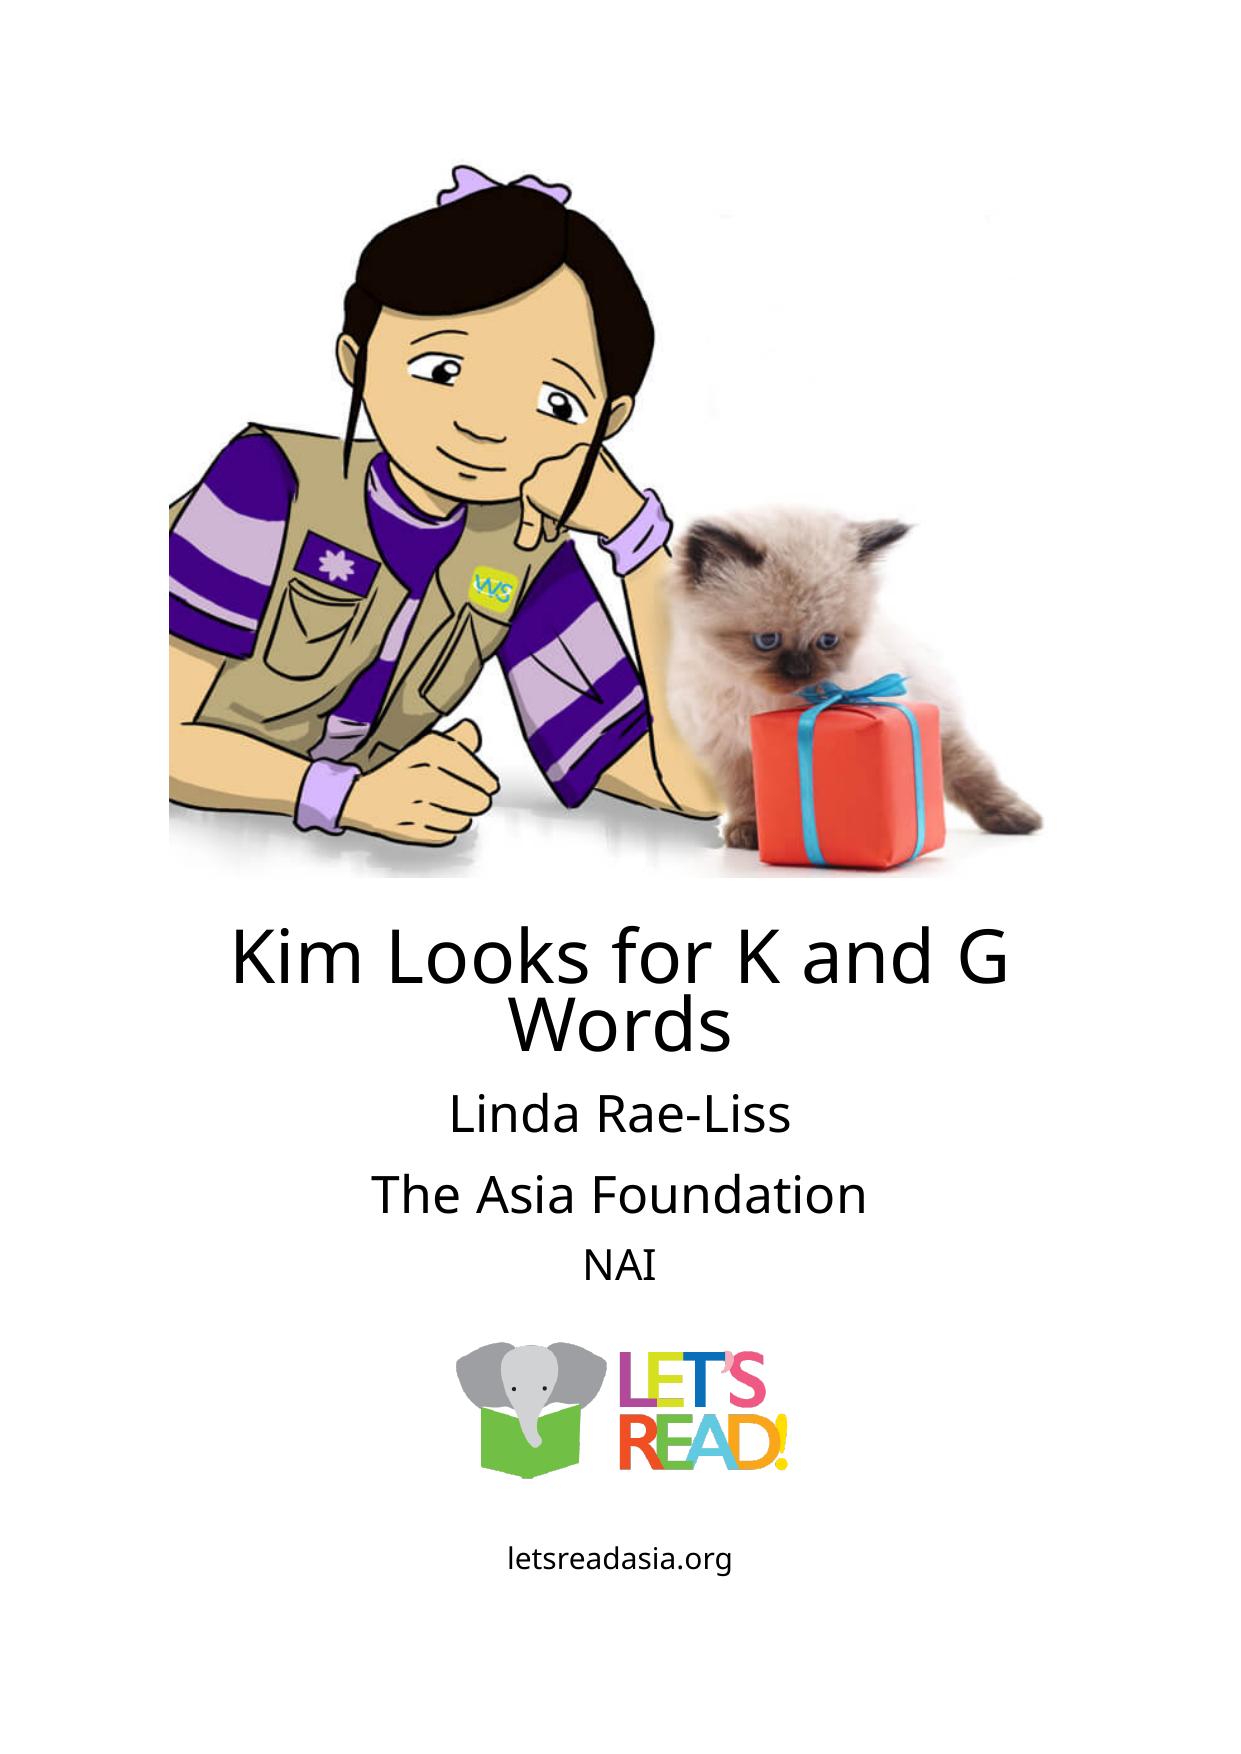 Kim Looks for K and G Words